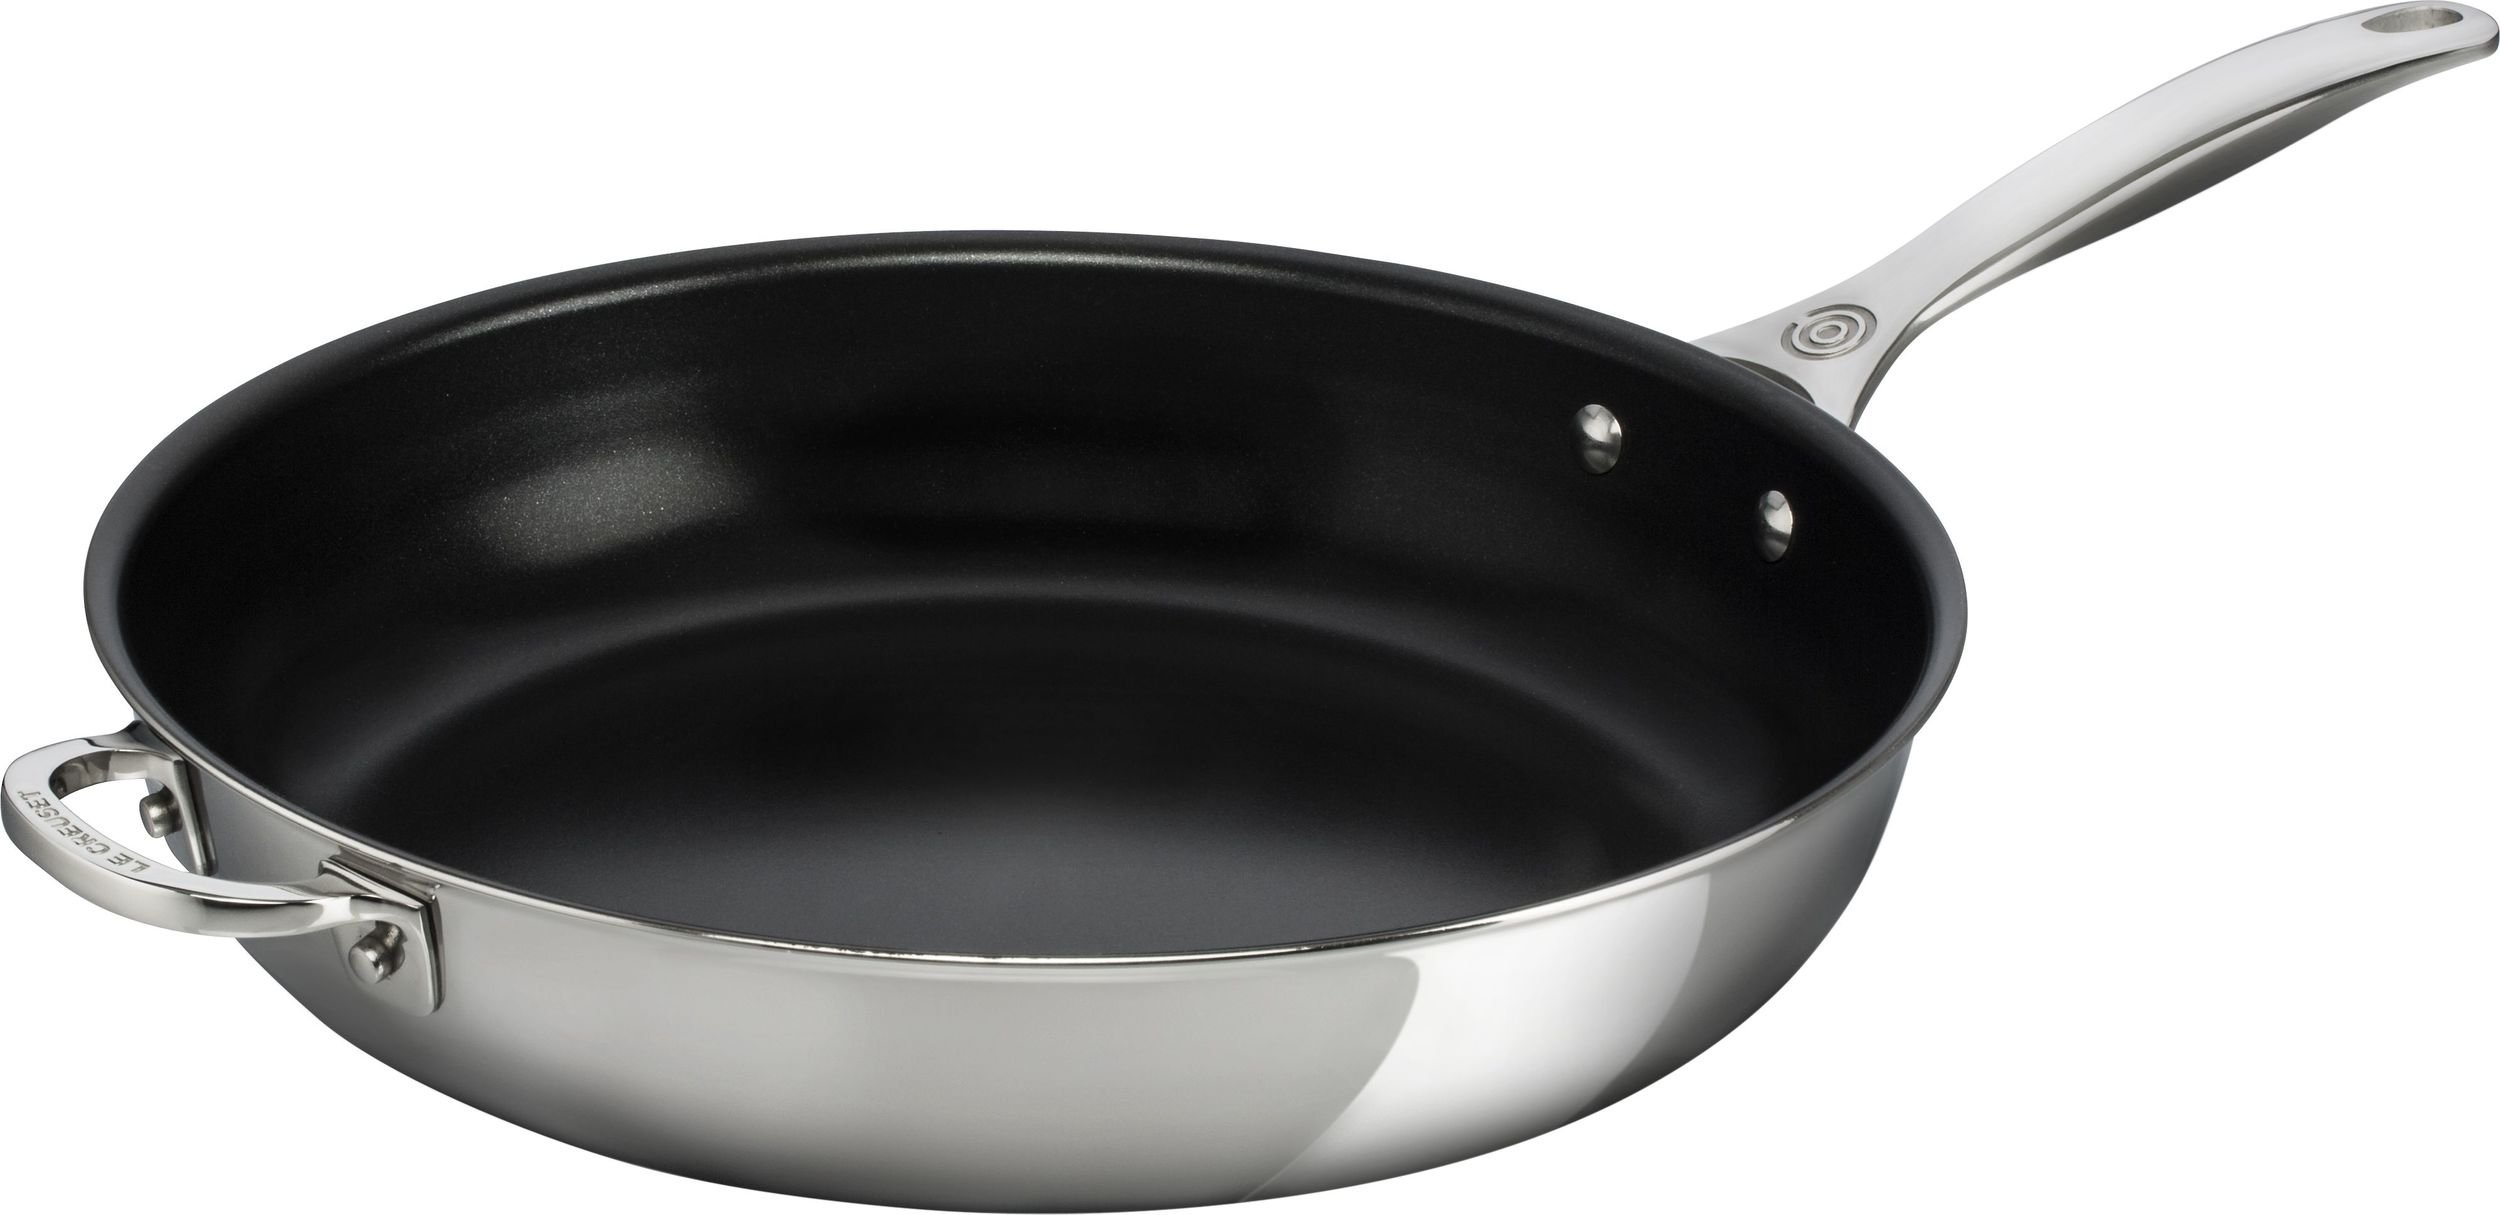 https://3fa-media.com/le-creuset/le-creuset-3-ply-plus-pan-32-cm-with-a-handle-and-a-non-stick-coating__126724_bd851db-s2500x2500.jpg